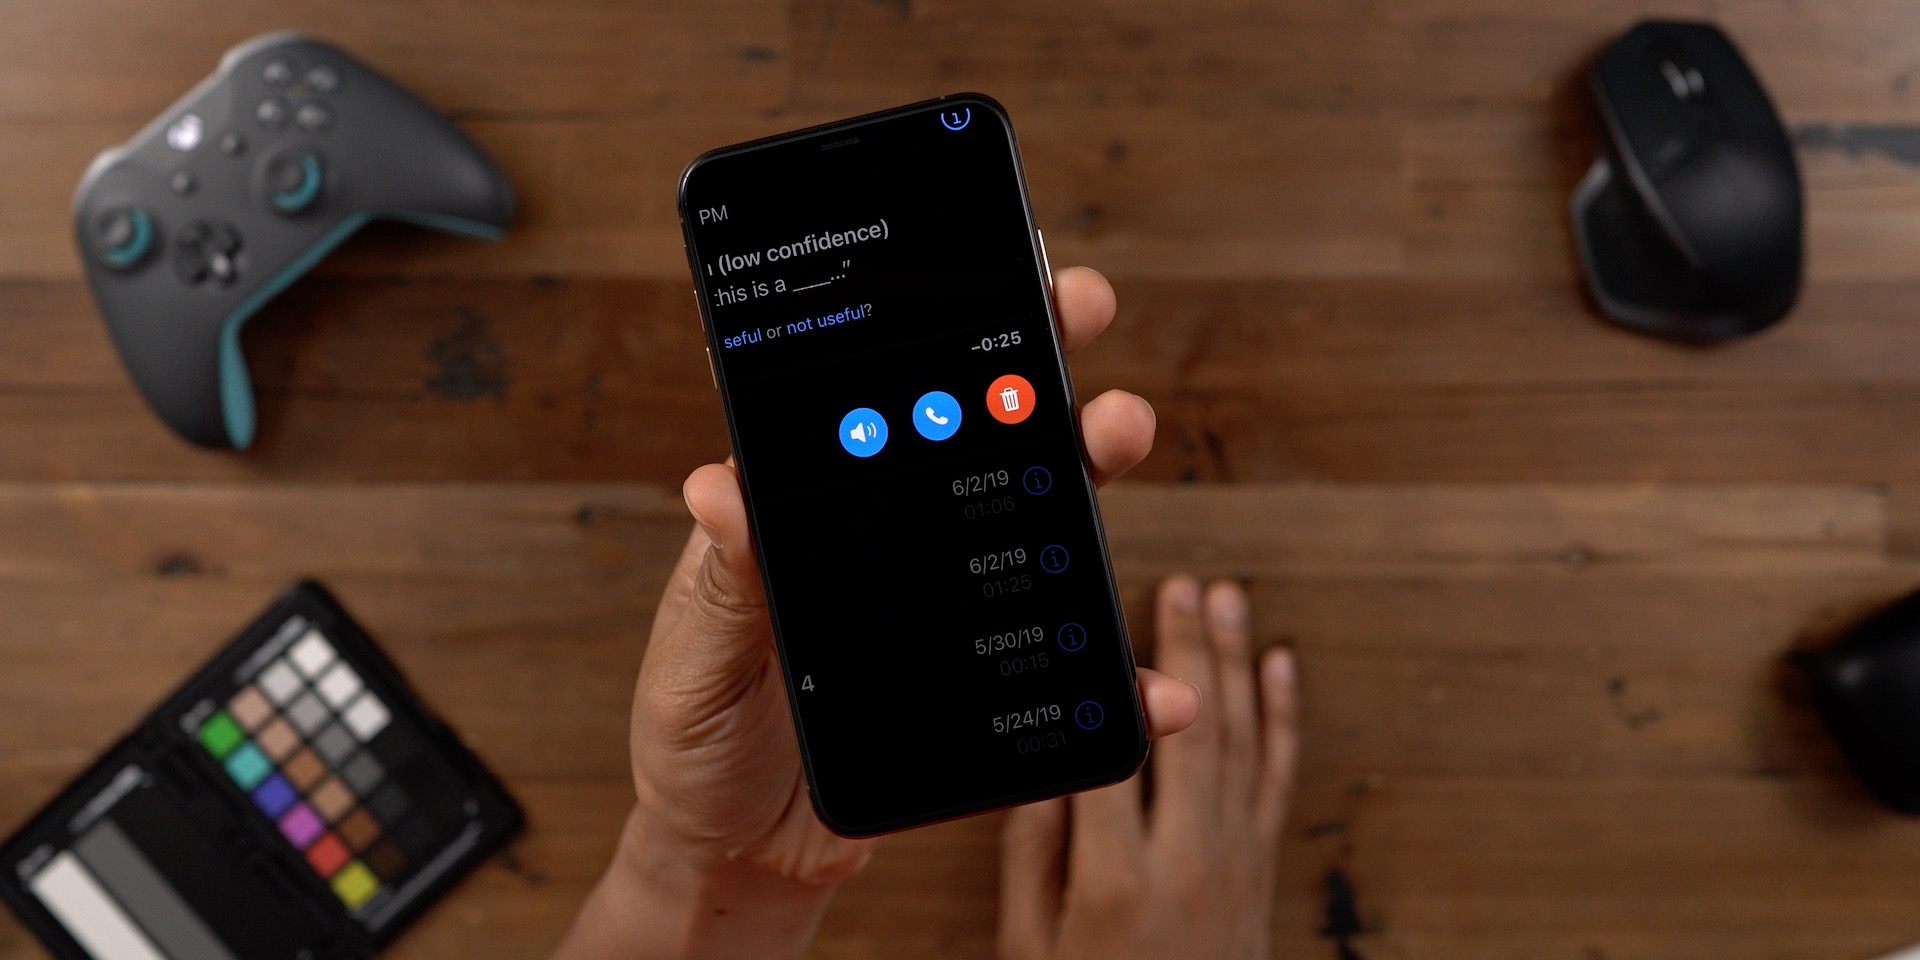 Larger voicemail buttons iOS 13 beta 2